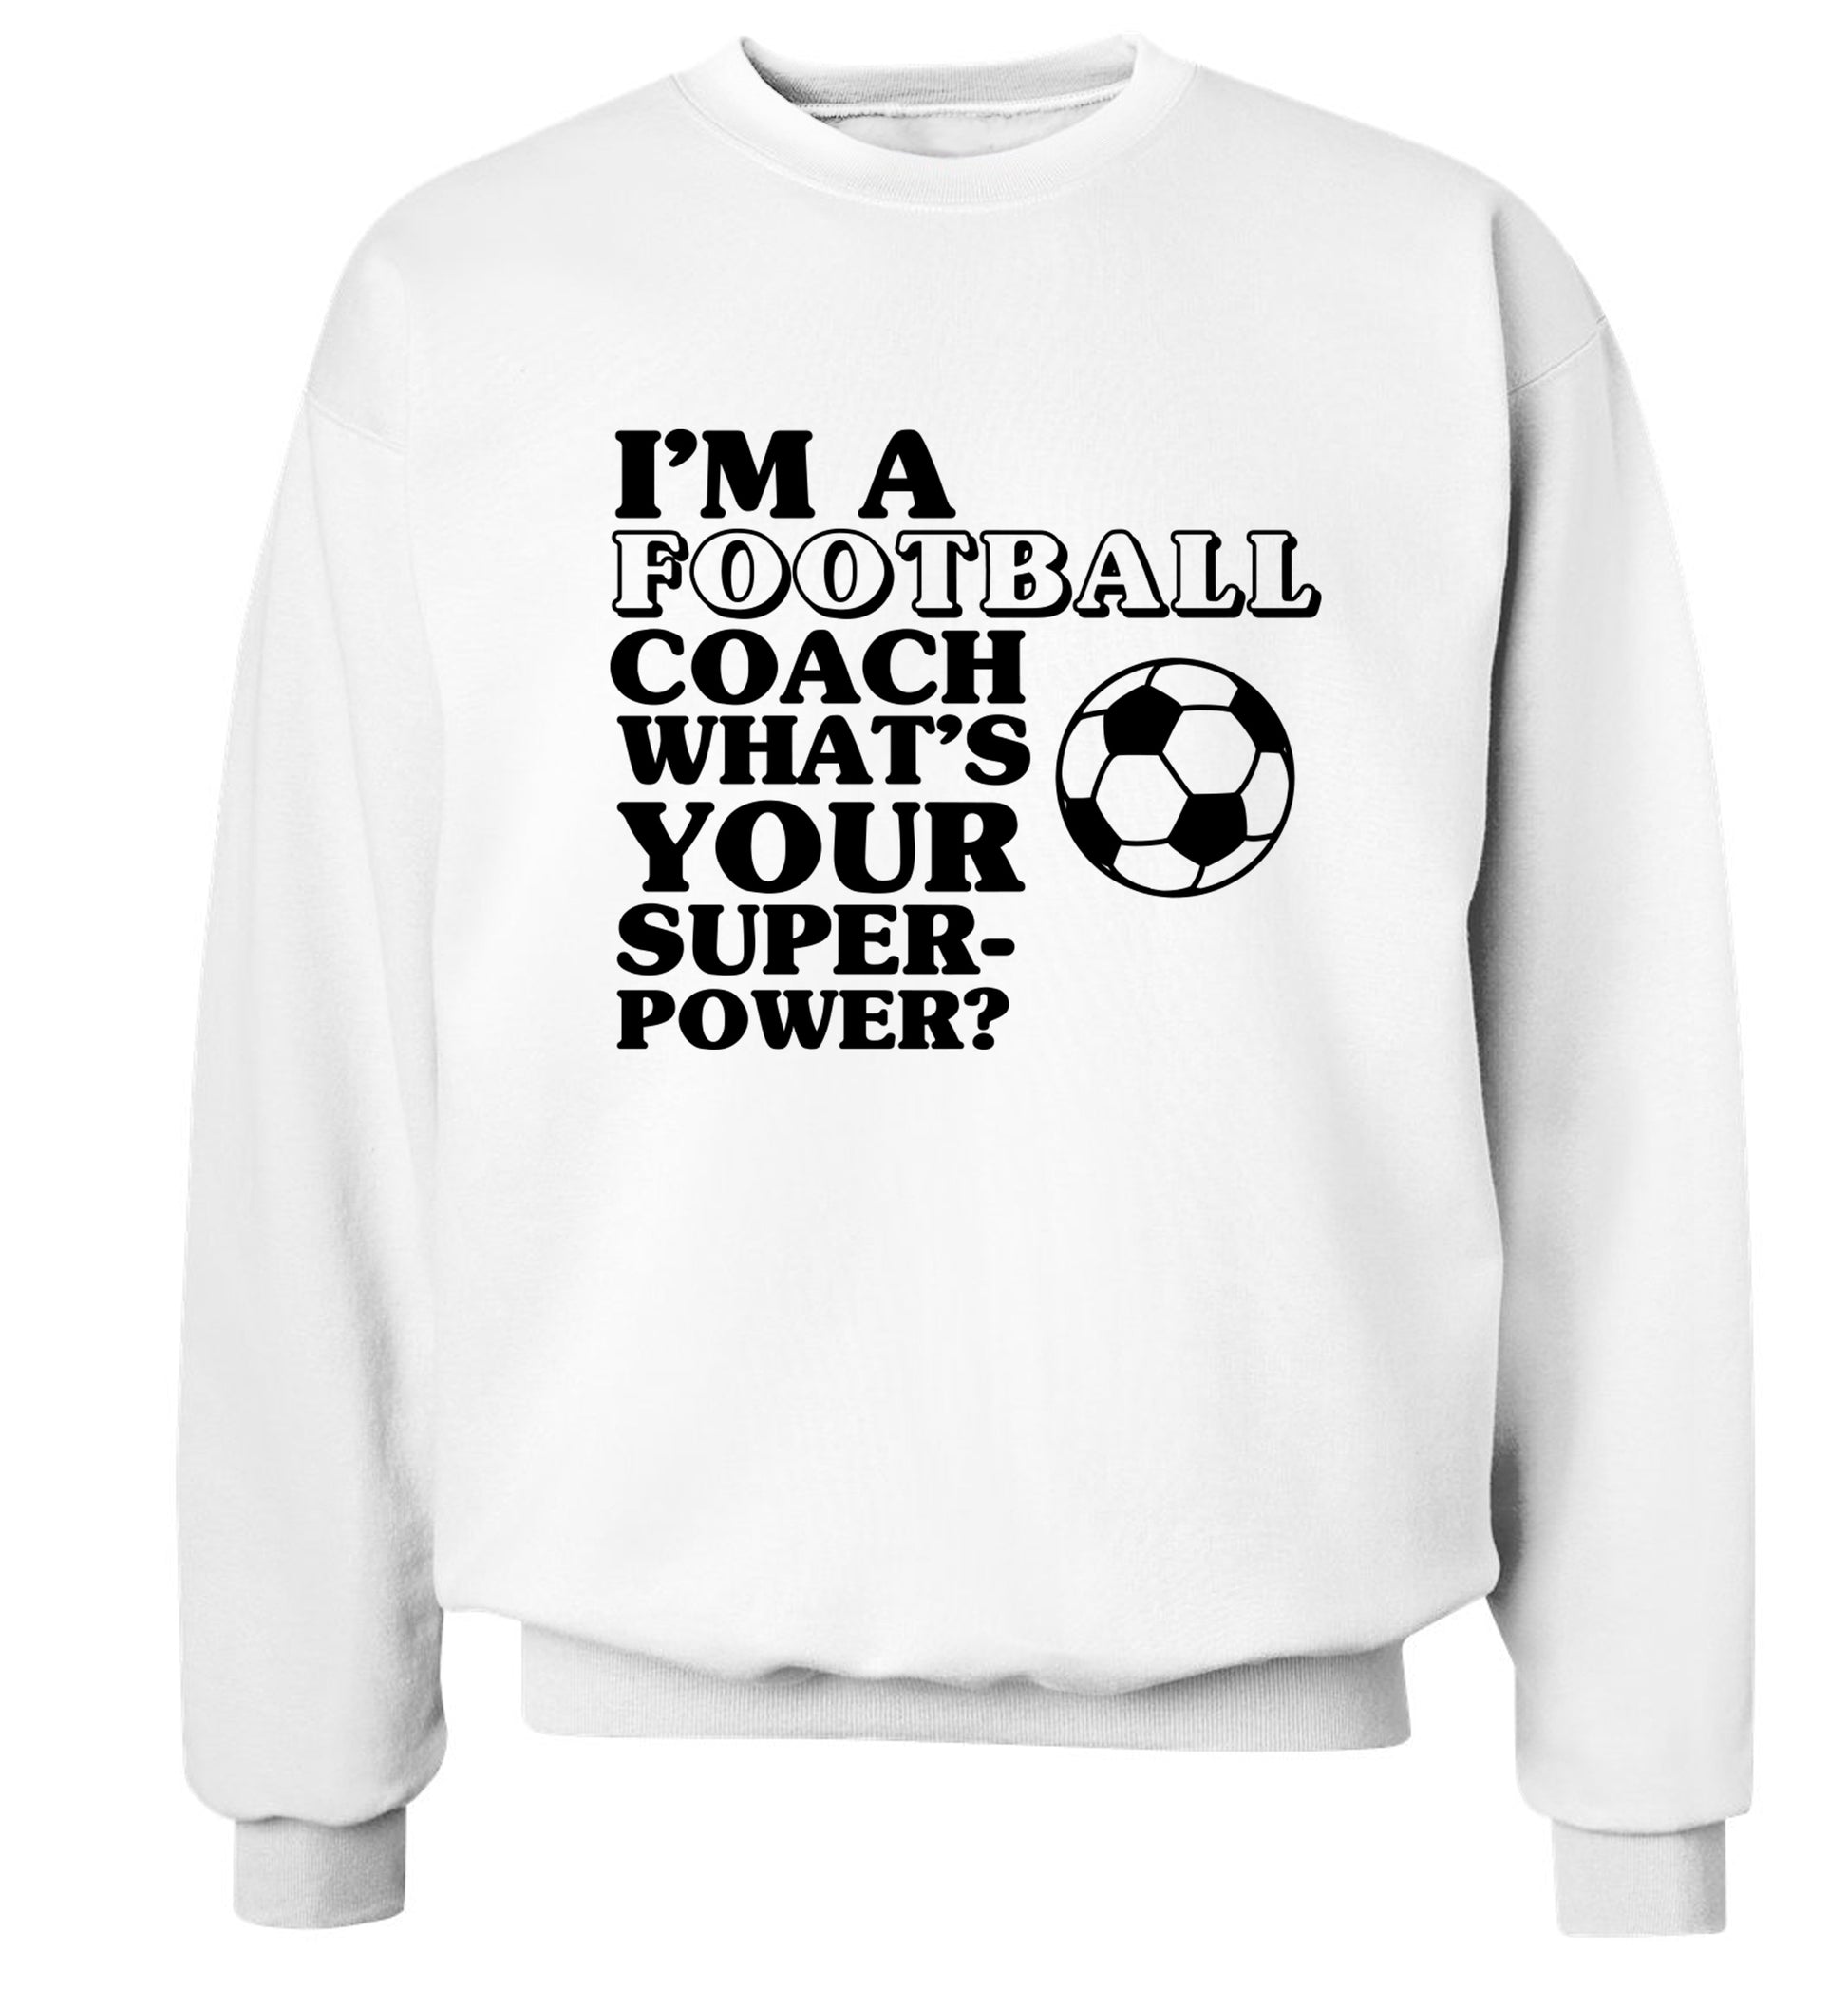 I'm a football coach what's your superpower? Adult's unisexwhite Sweater 2XL